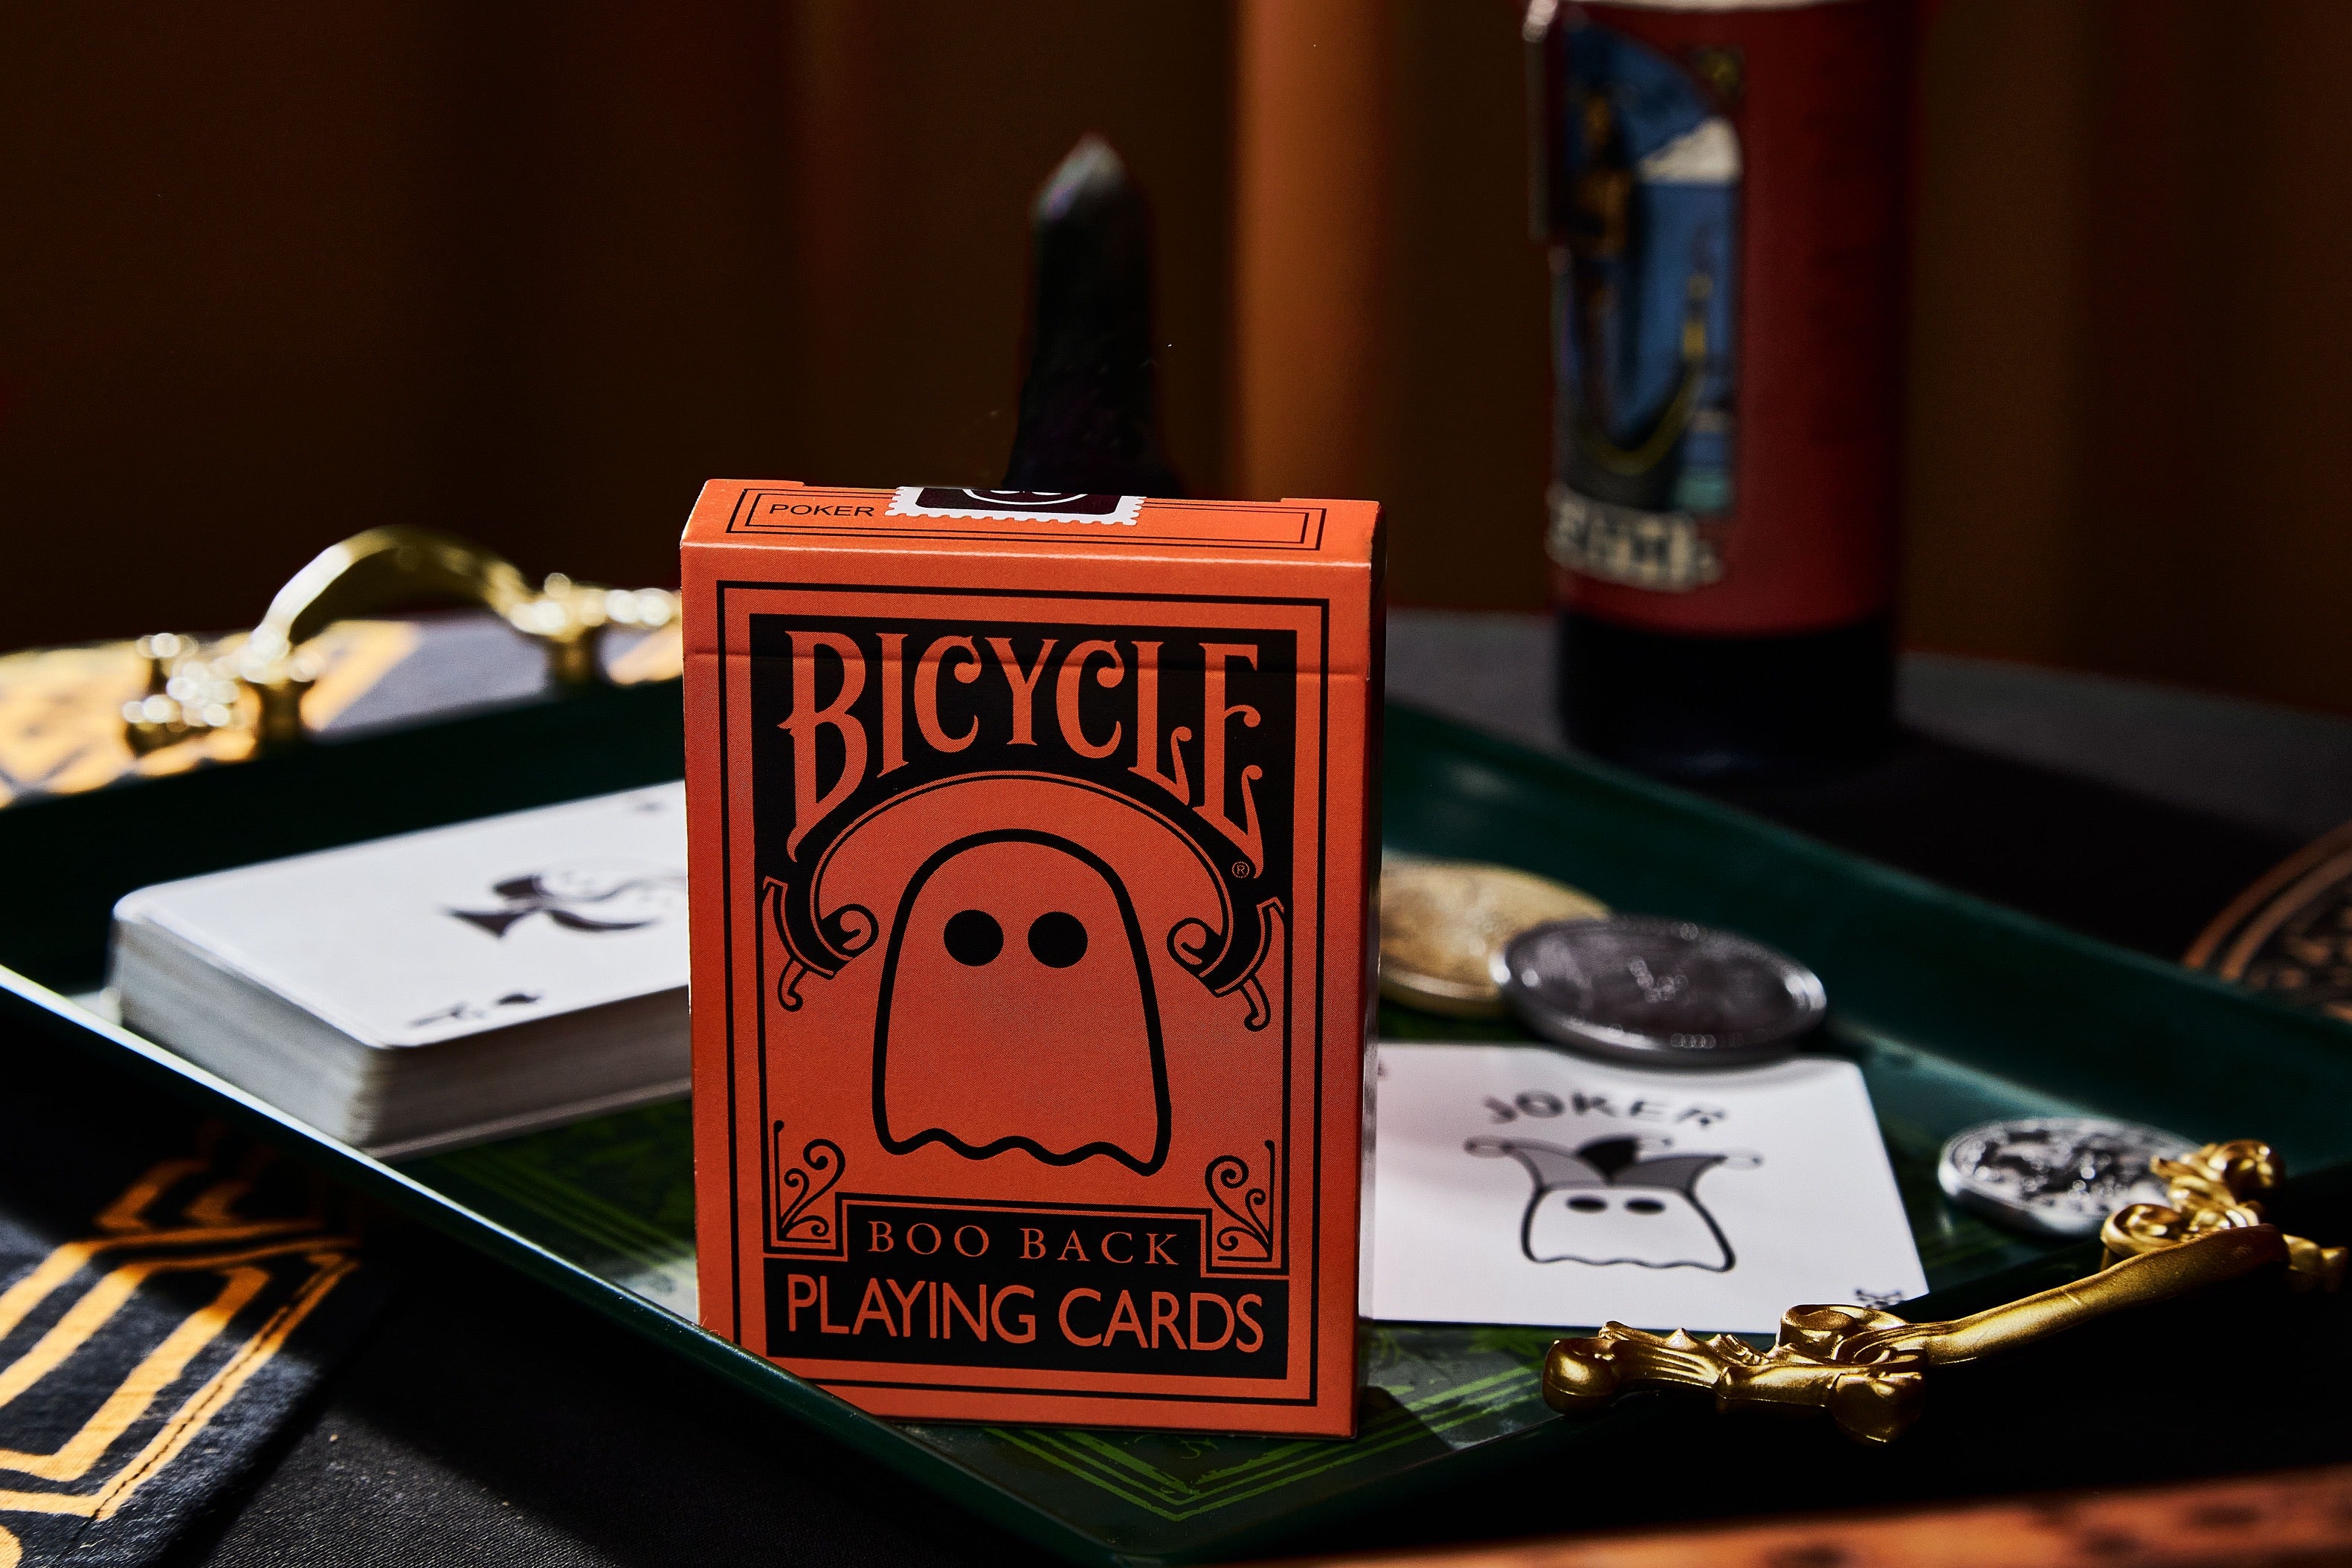 Bicycle Boo Backs by The Card Firm